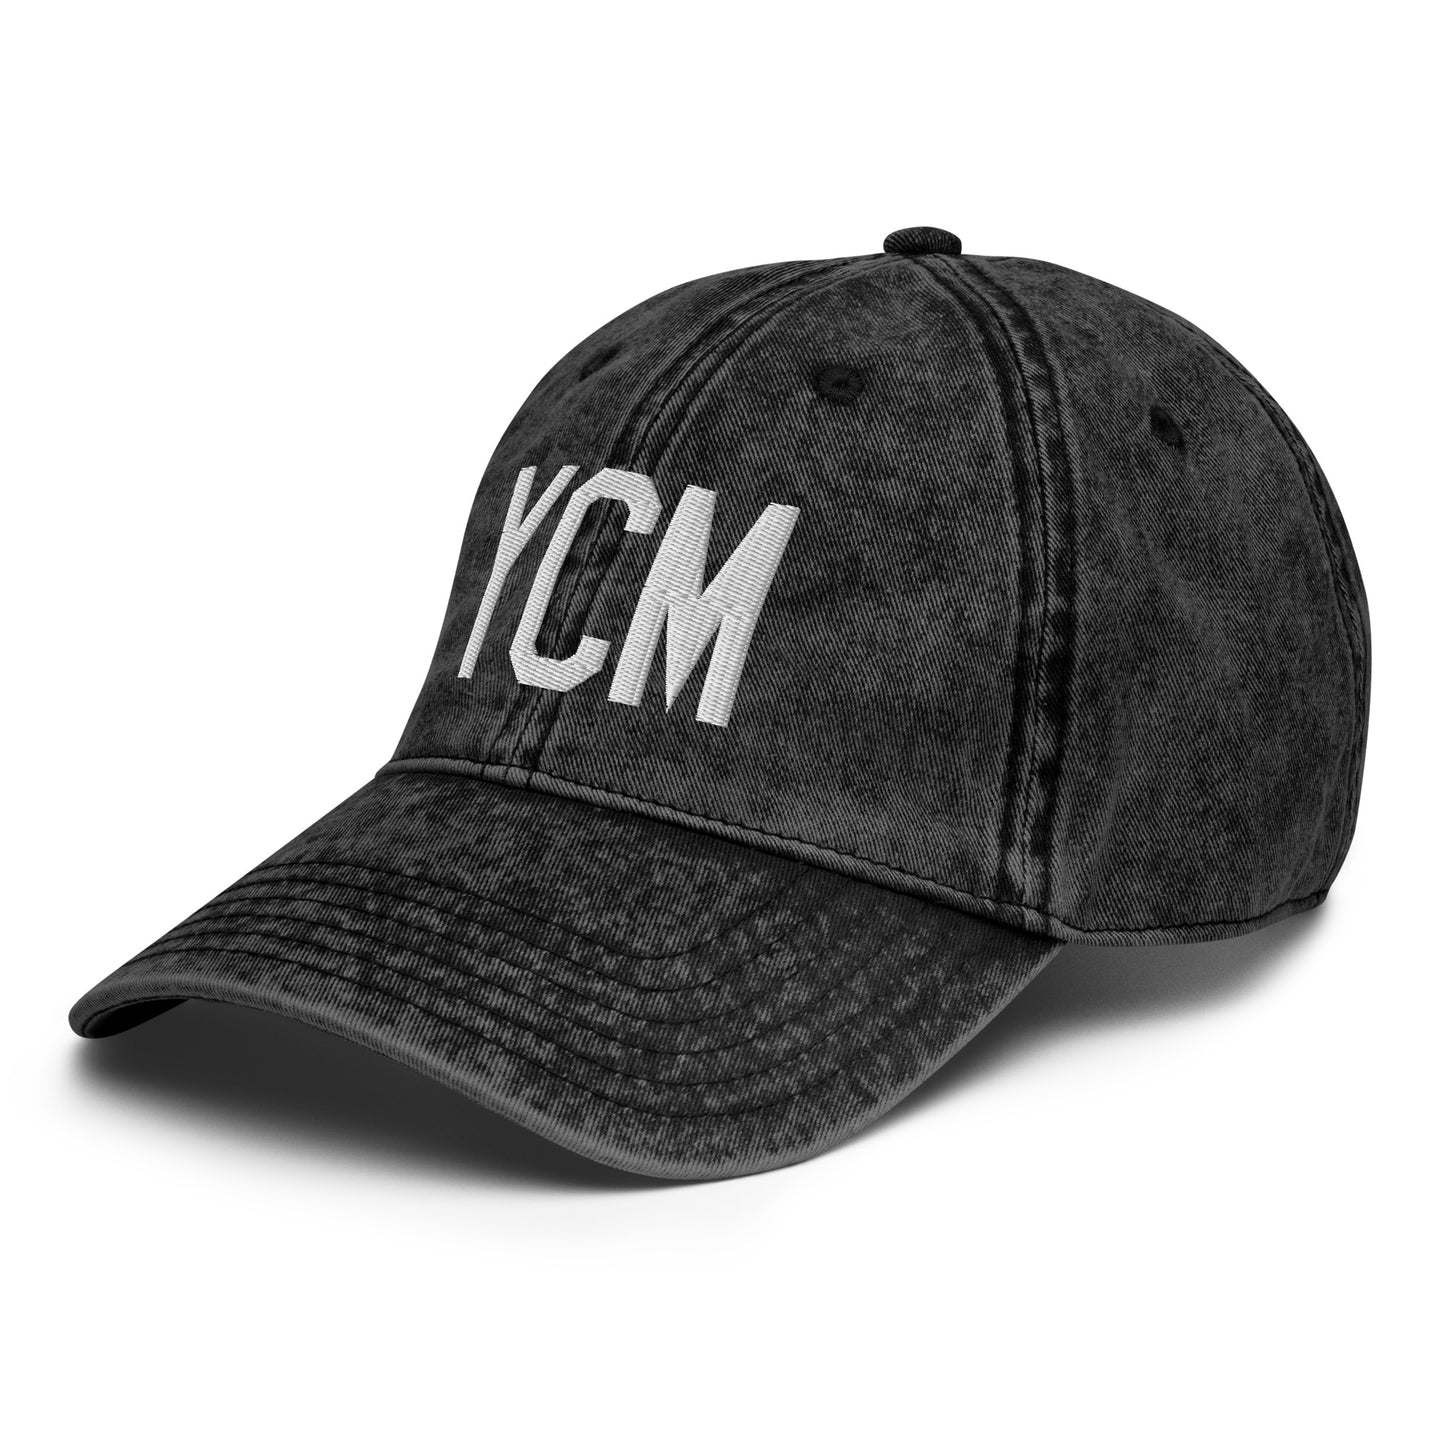 Airport Code Twill Cap - White • YCM St. Catharines • YHM Designs - Image 01